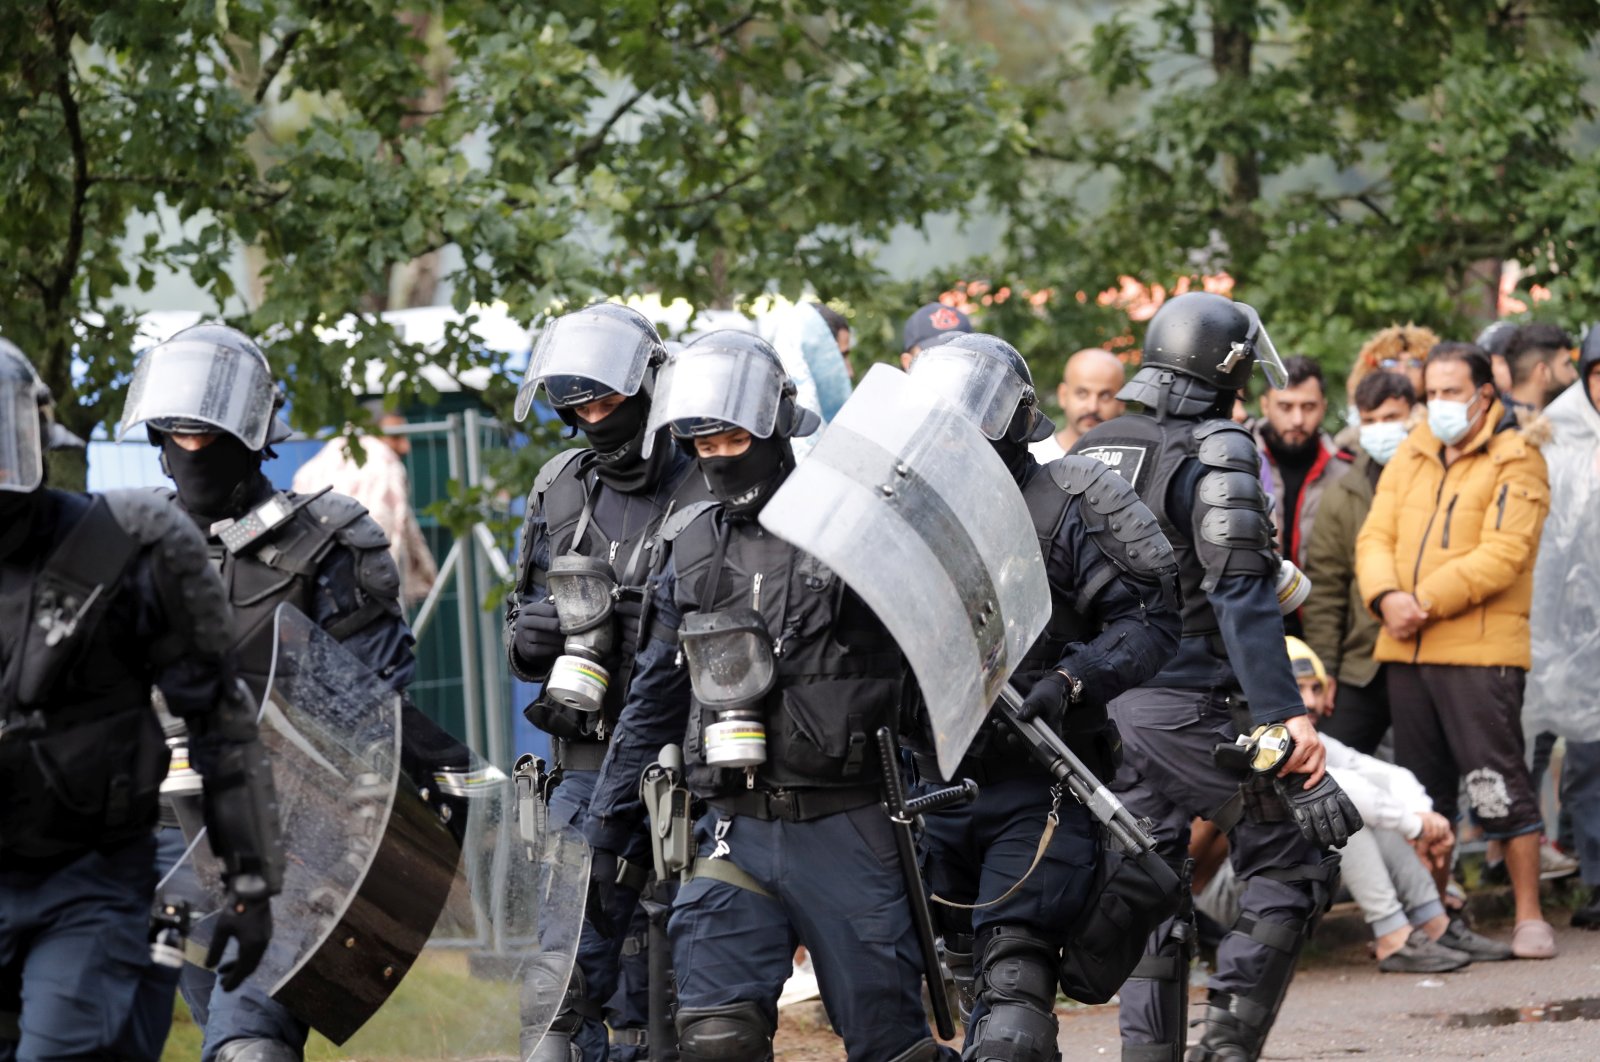 Riot police officers and migrants are seen at the tent camp in the Rudninkai training ground, Lithuania, Aug. 2, 2021. (EPA Photo)